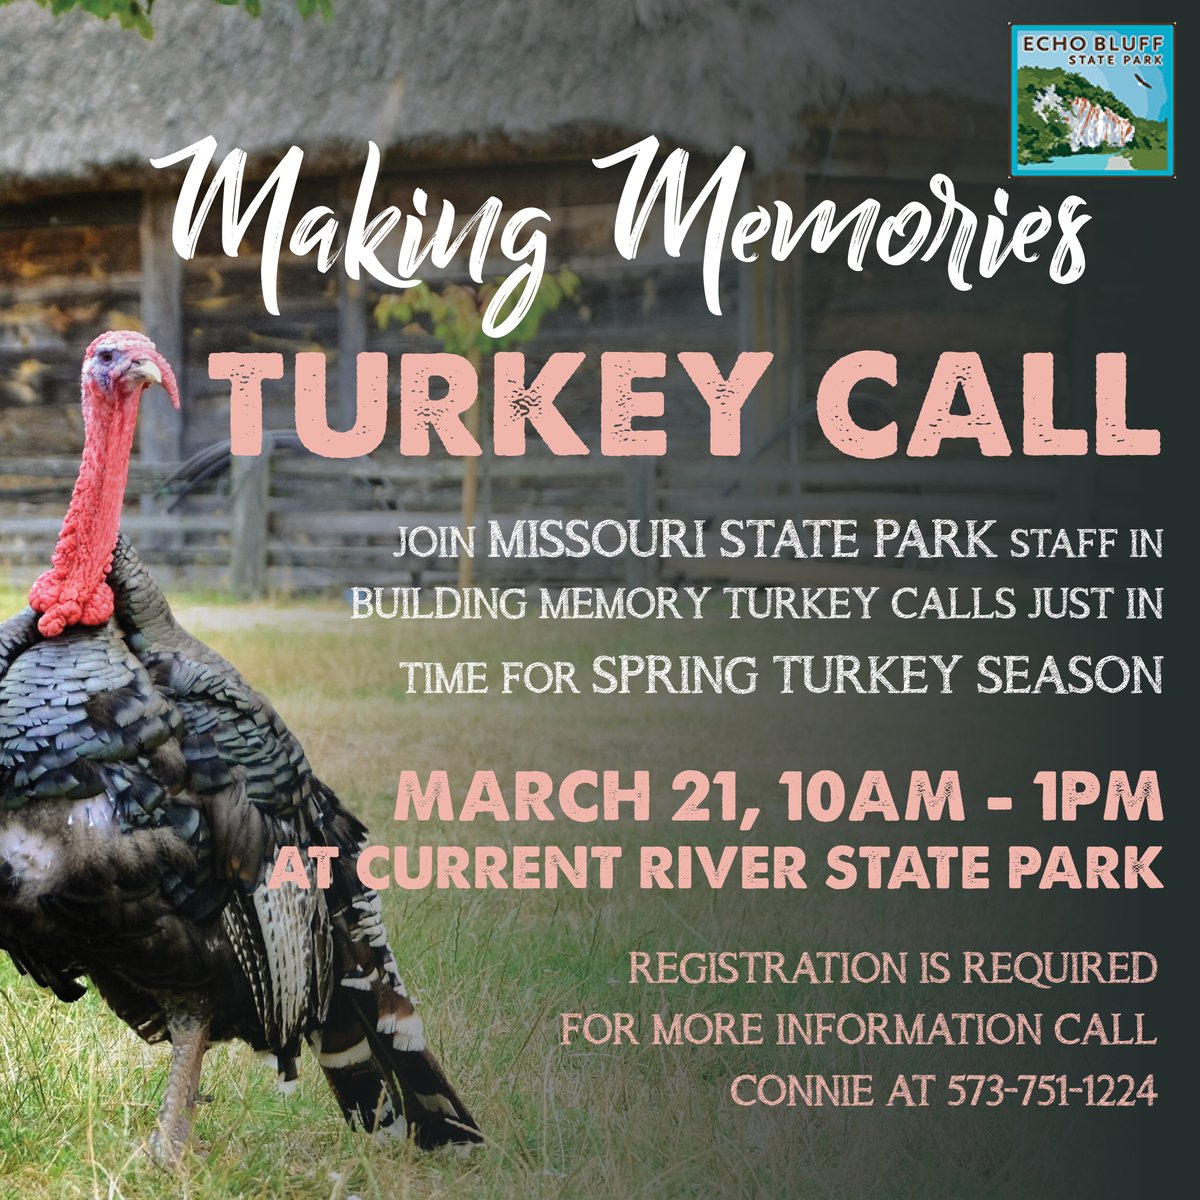 Join #MissouriStatePark staff building memory turkey calls just in time for turkey season at Current River State Park. All you need to bring is a picture - everything else is provided! Class limited & registration required. For more info, call 573-751-1224 facebook.com/events/2891737…